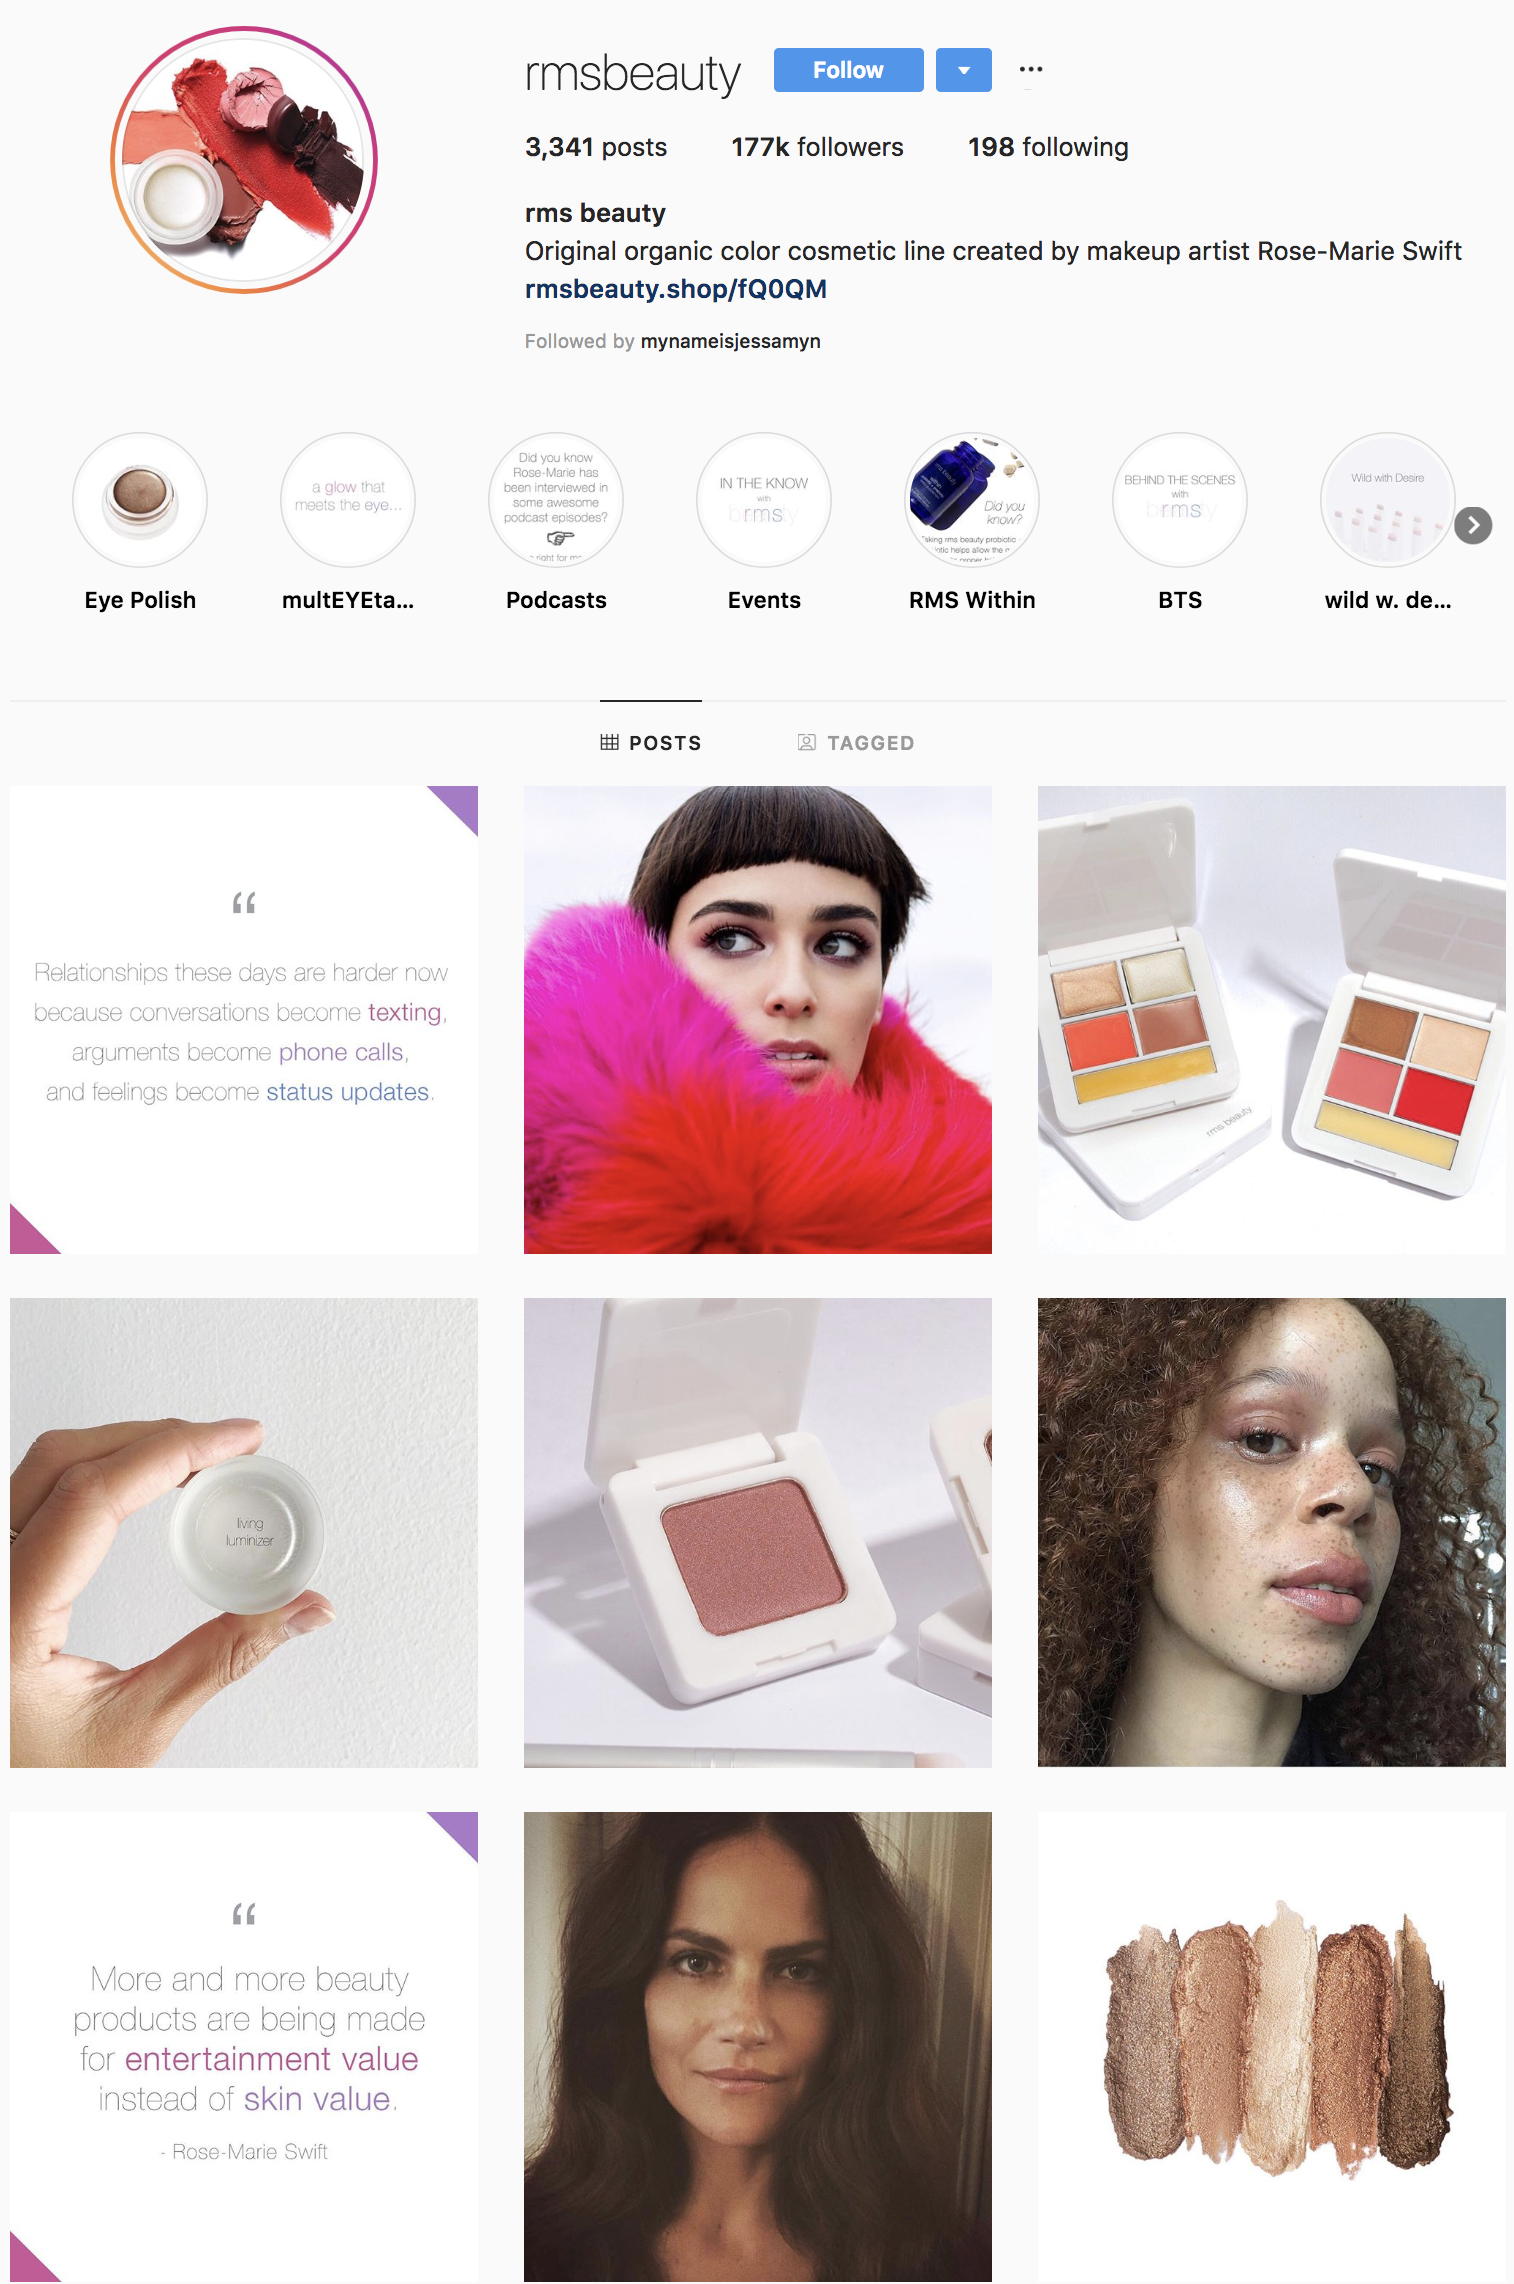 rms-beauty-instagram-influencer-profile